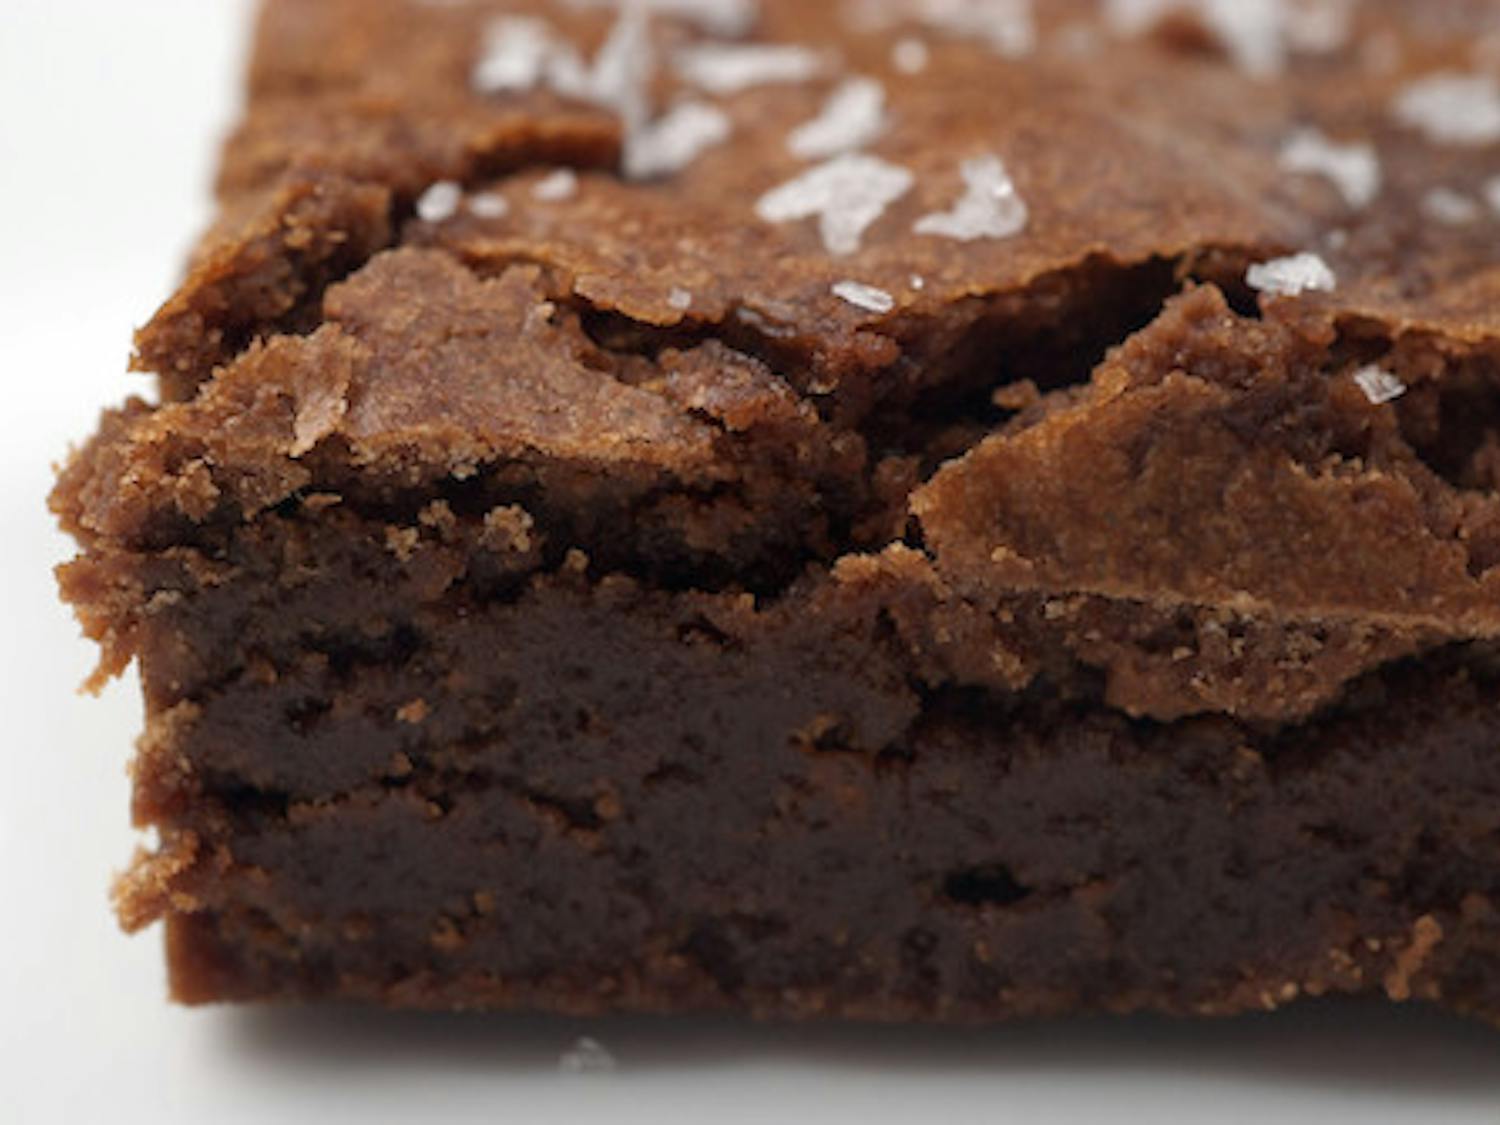 The salted fudge brownie makes for a delicious, feminism-inspired treat.